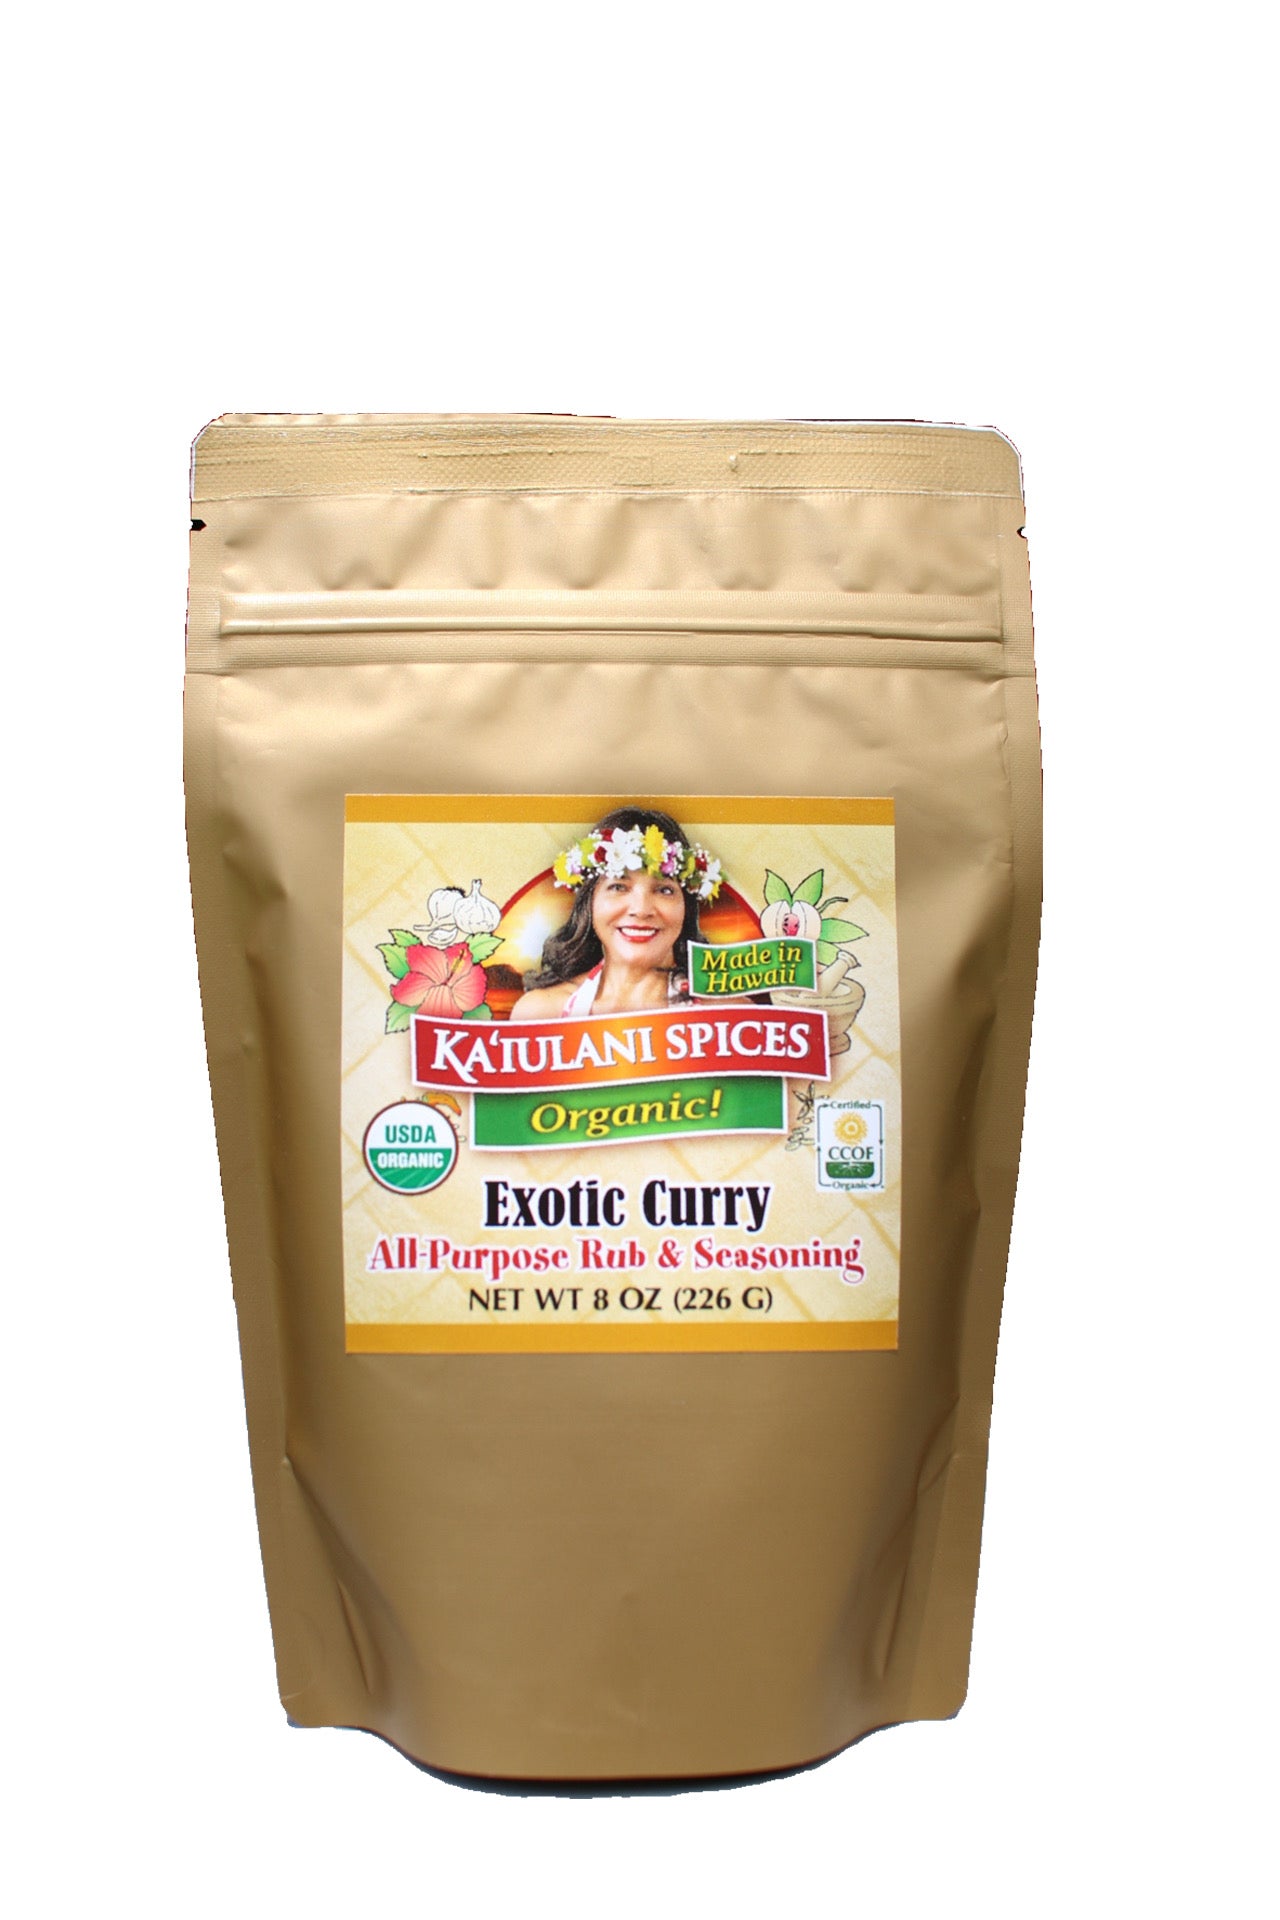 Exotic Curry Spice